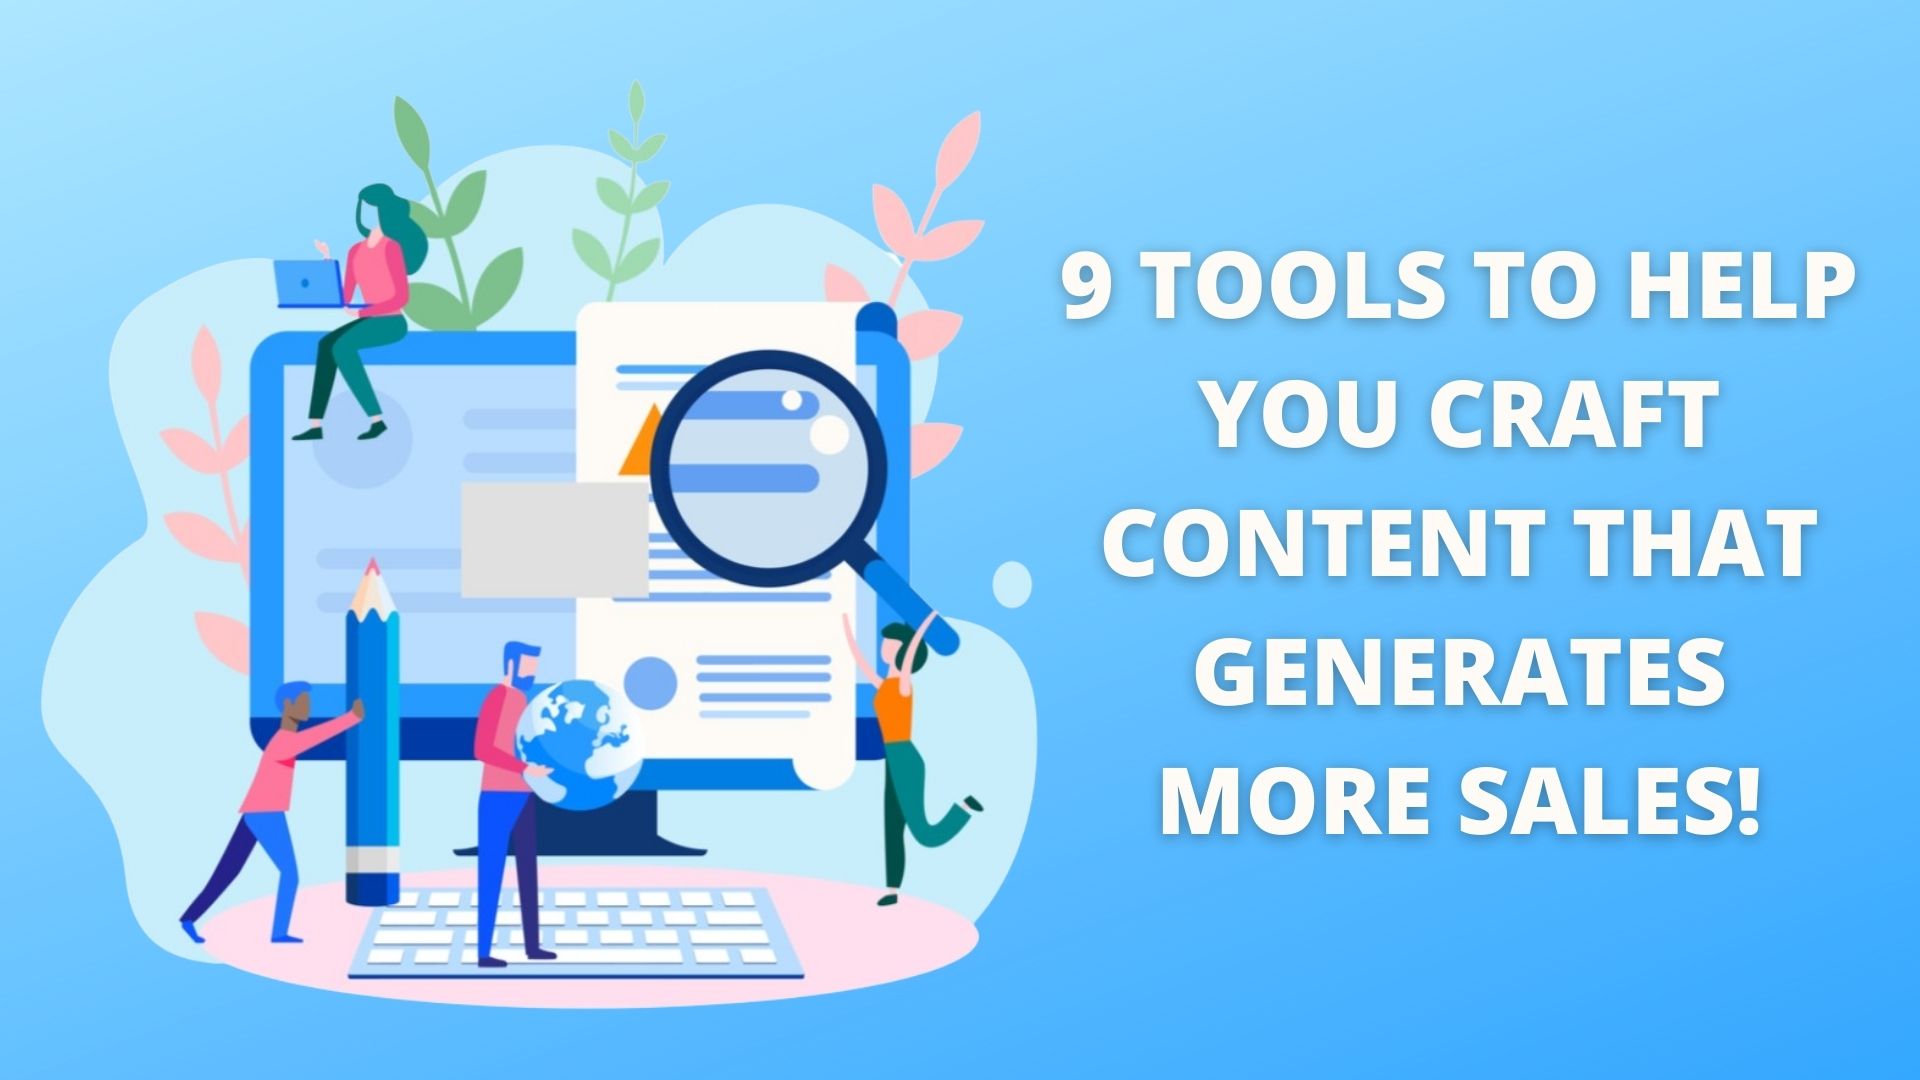 9 TOOLS TO HELP YOU CRAFT CONTENT THAT GENERATES MORE SALES!